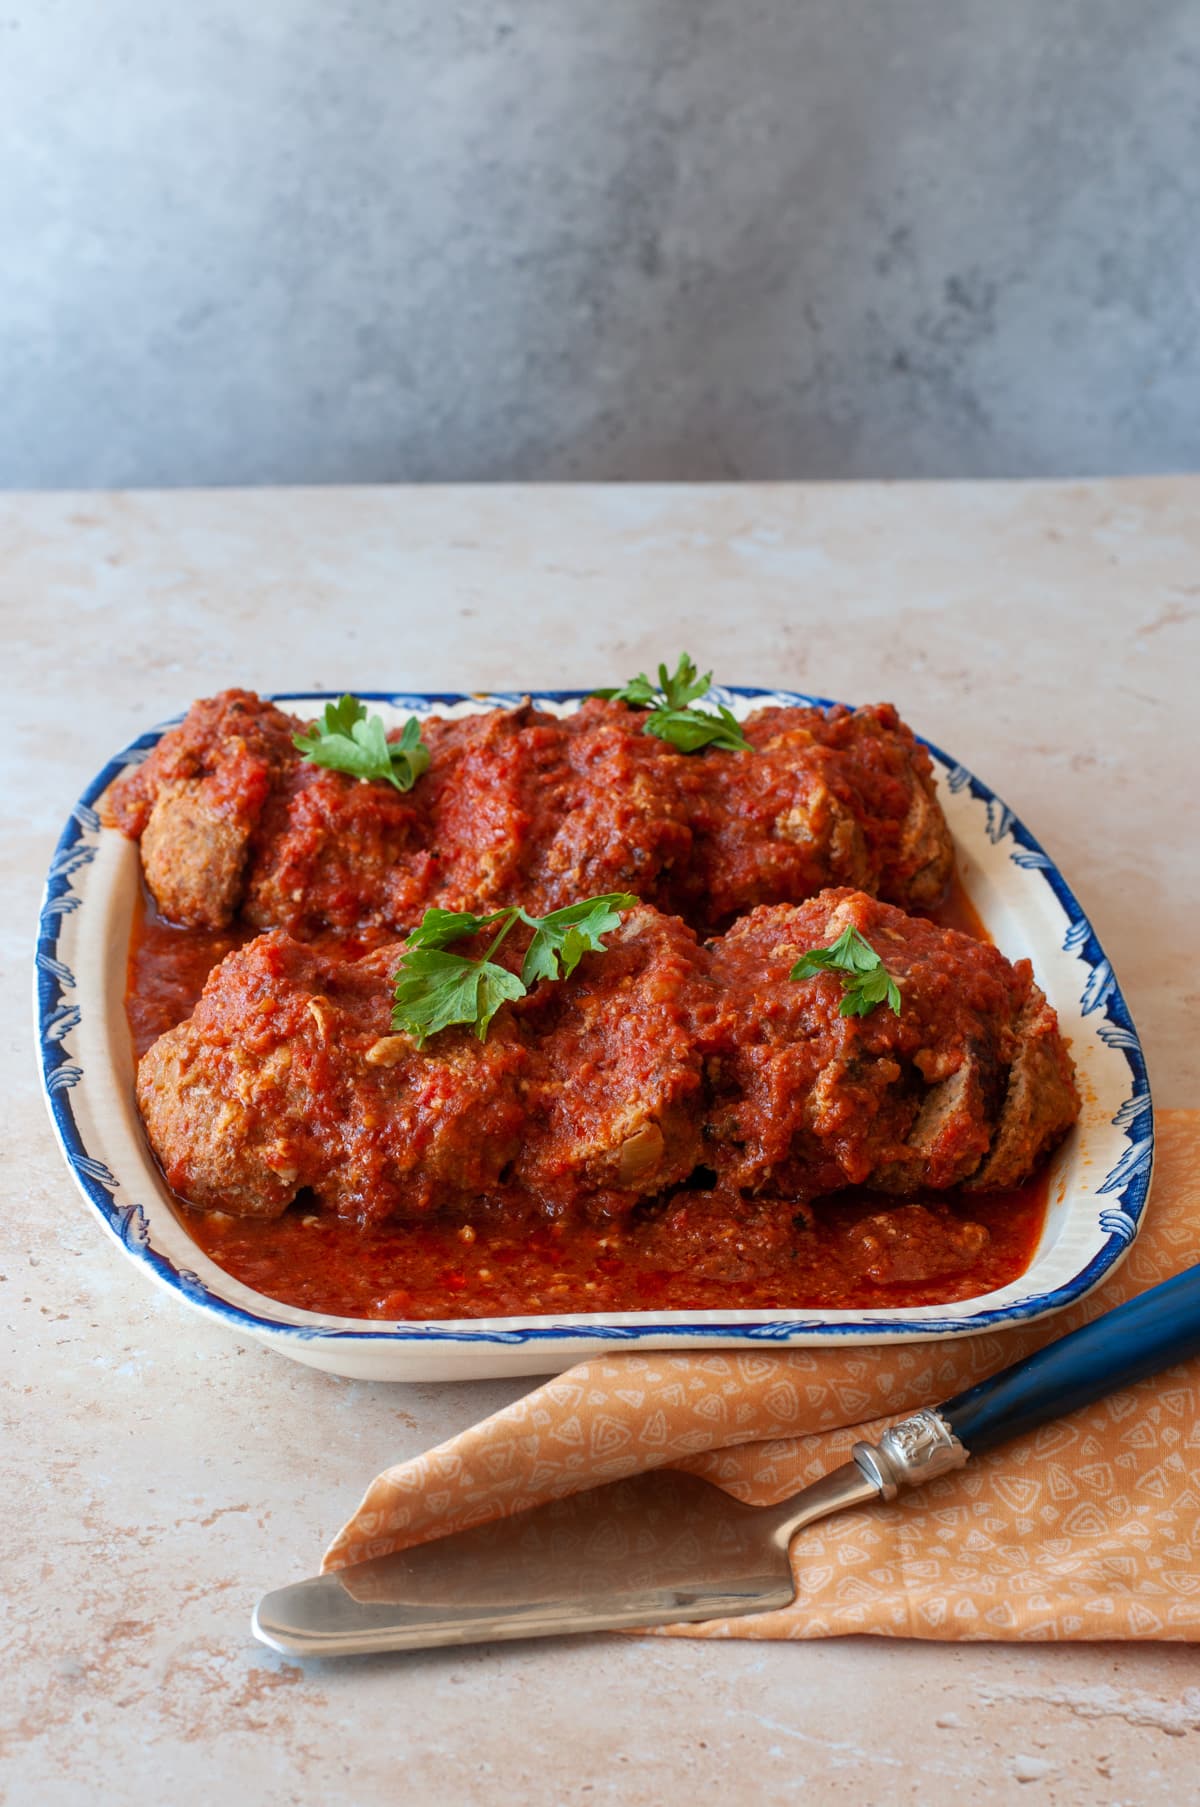 meatloaf served with the tomato sauce